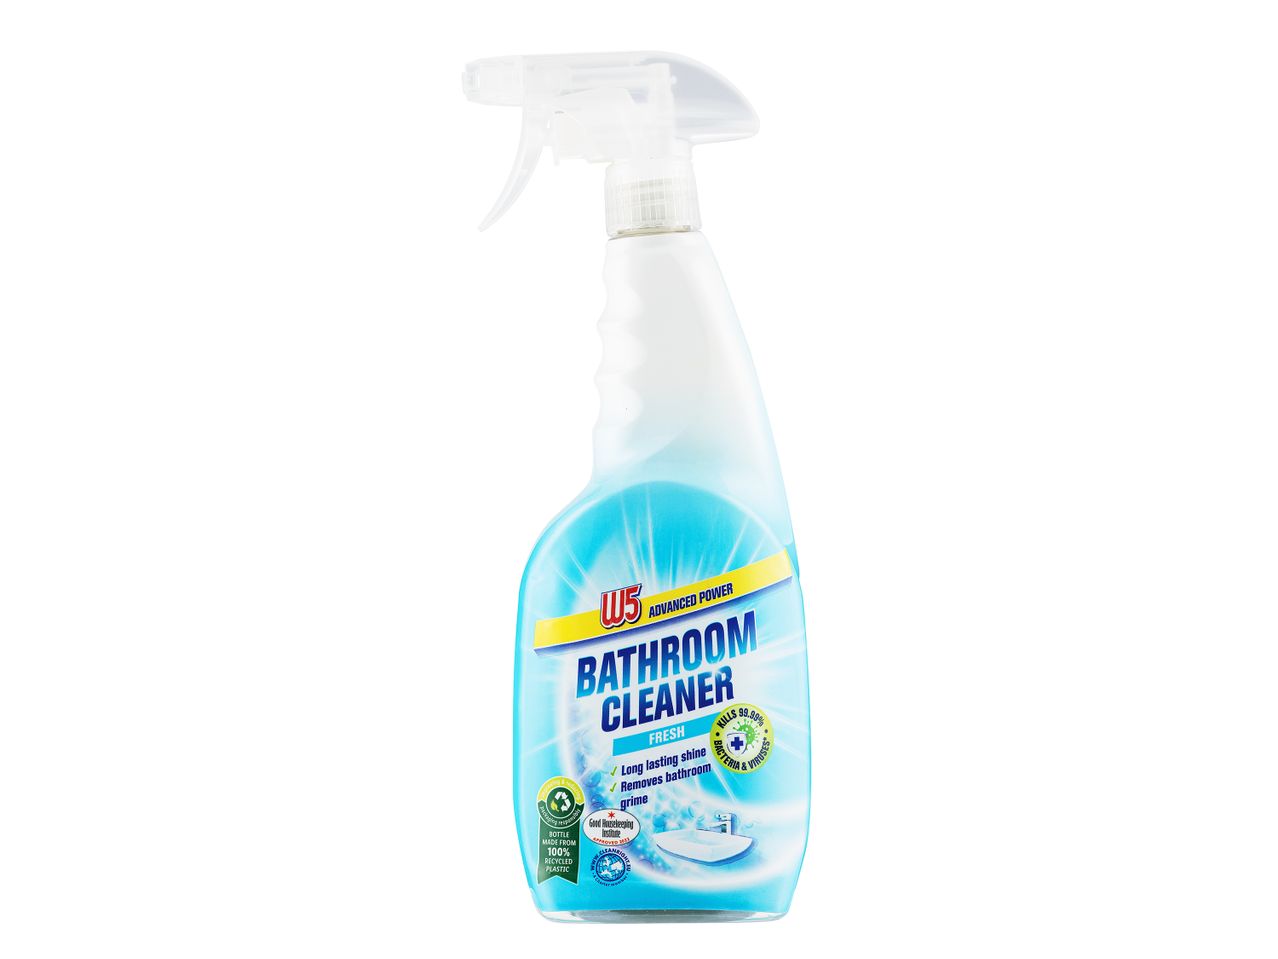 Go to full screen view: W5 Bathroom Cleaner - Image 1